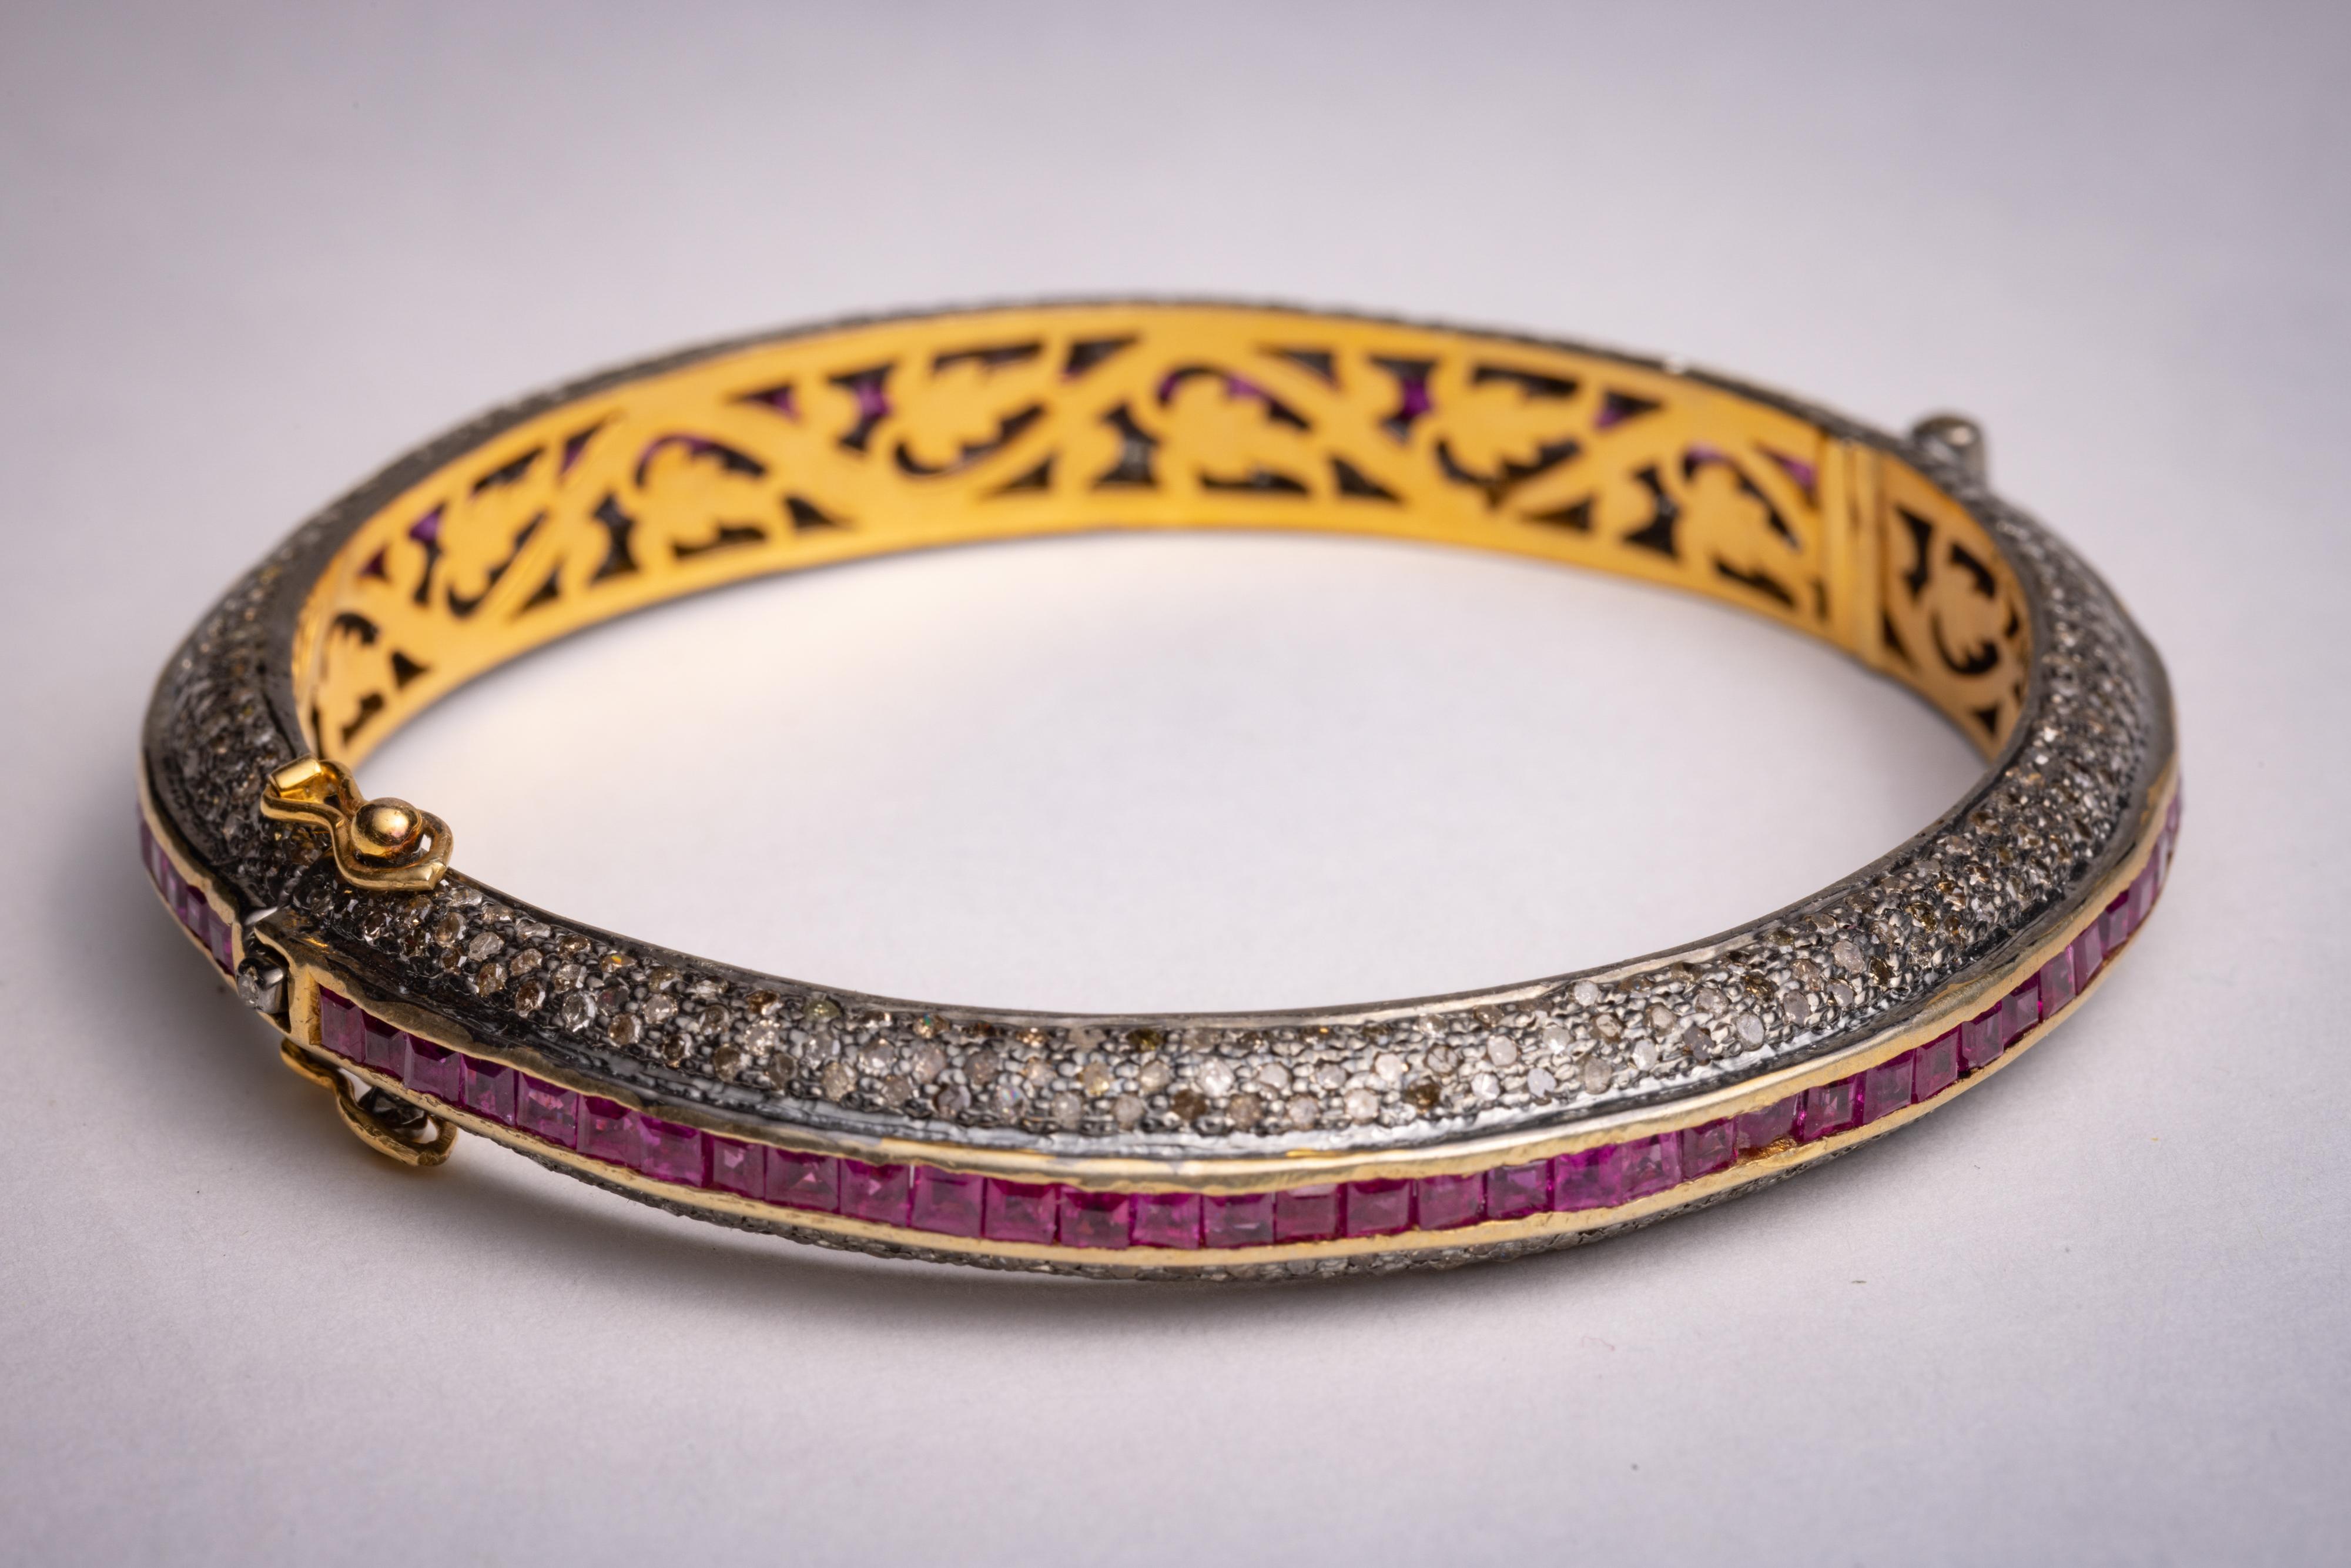 A ruby and diamond bangle with clasp.  Faceted square, channel-set rubies surrounded by round, brilliant cut diamonds in a pave` setting.  Stones are set in sterling silver and bracelet is lined in 18K gold.  Inside circumference is 7